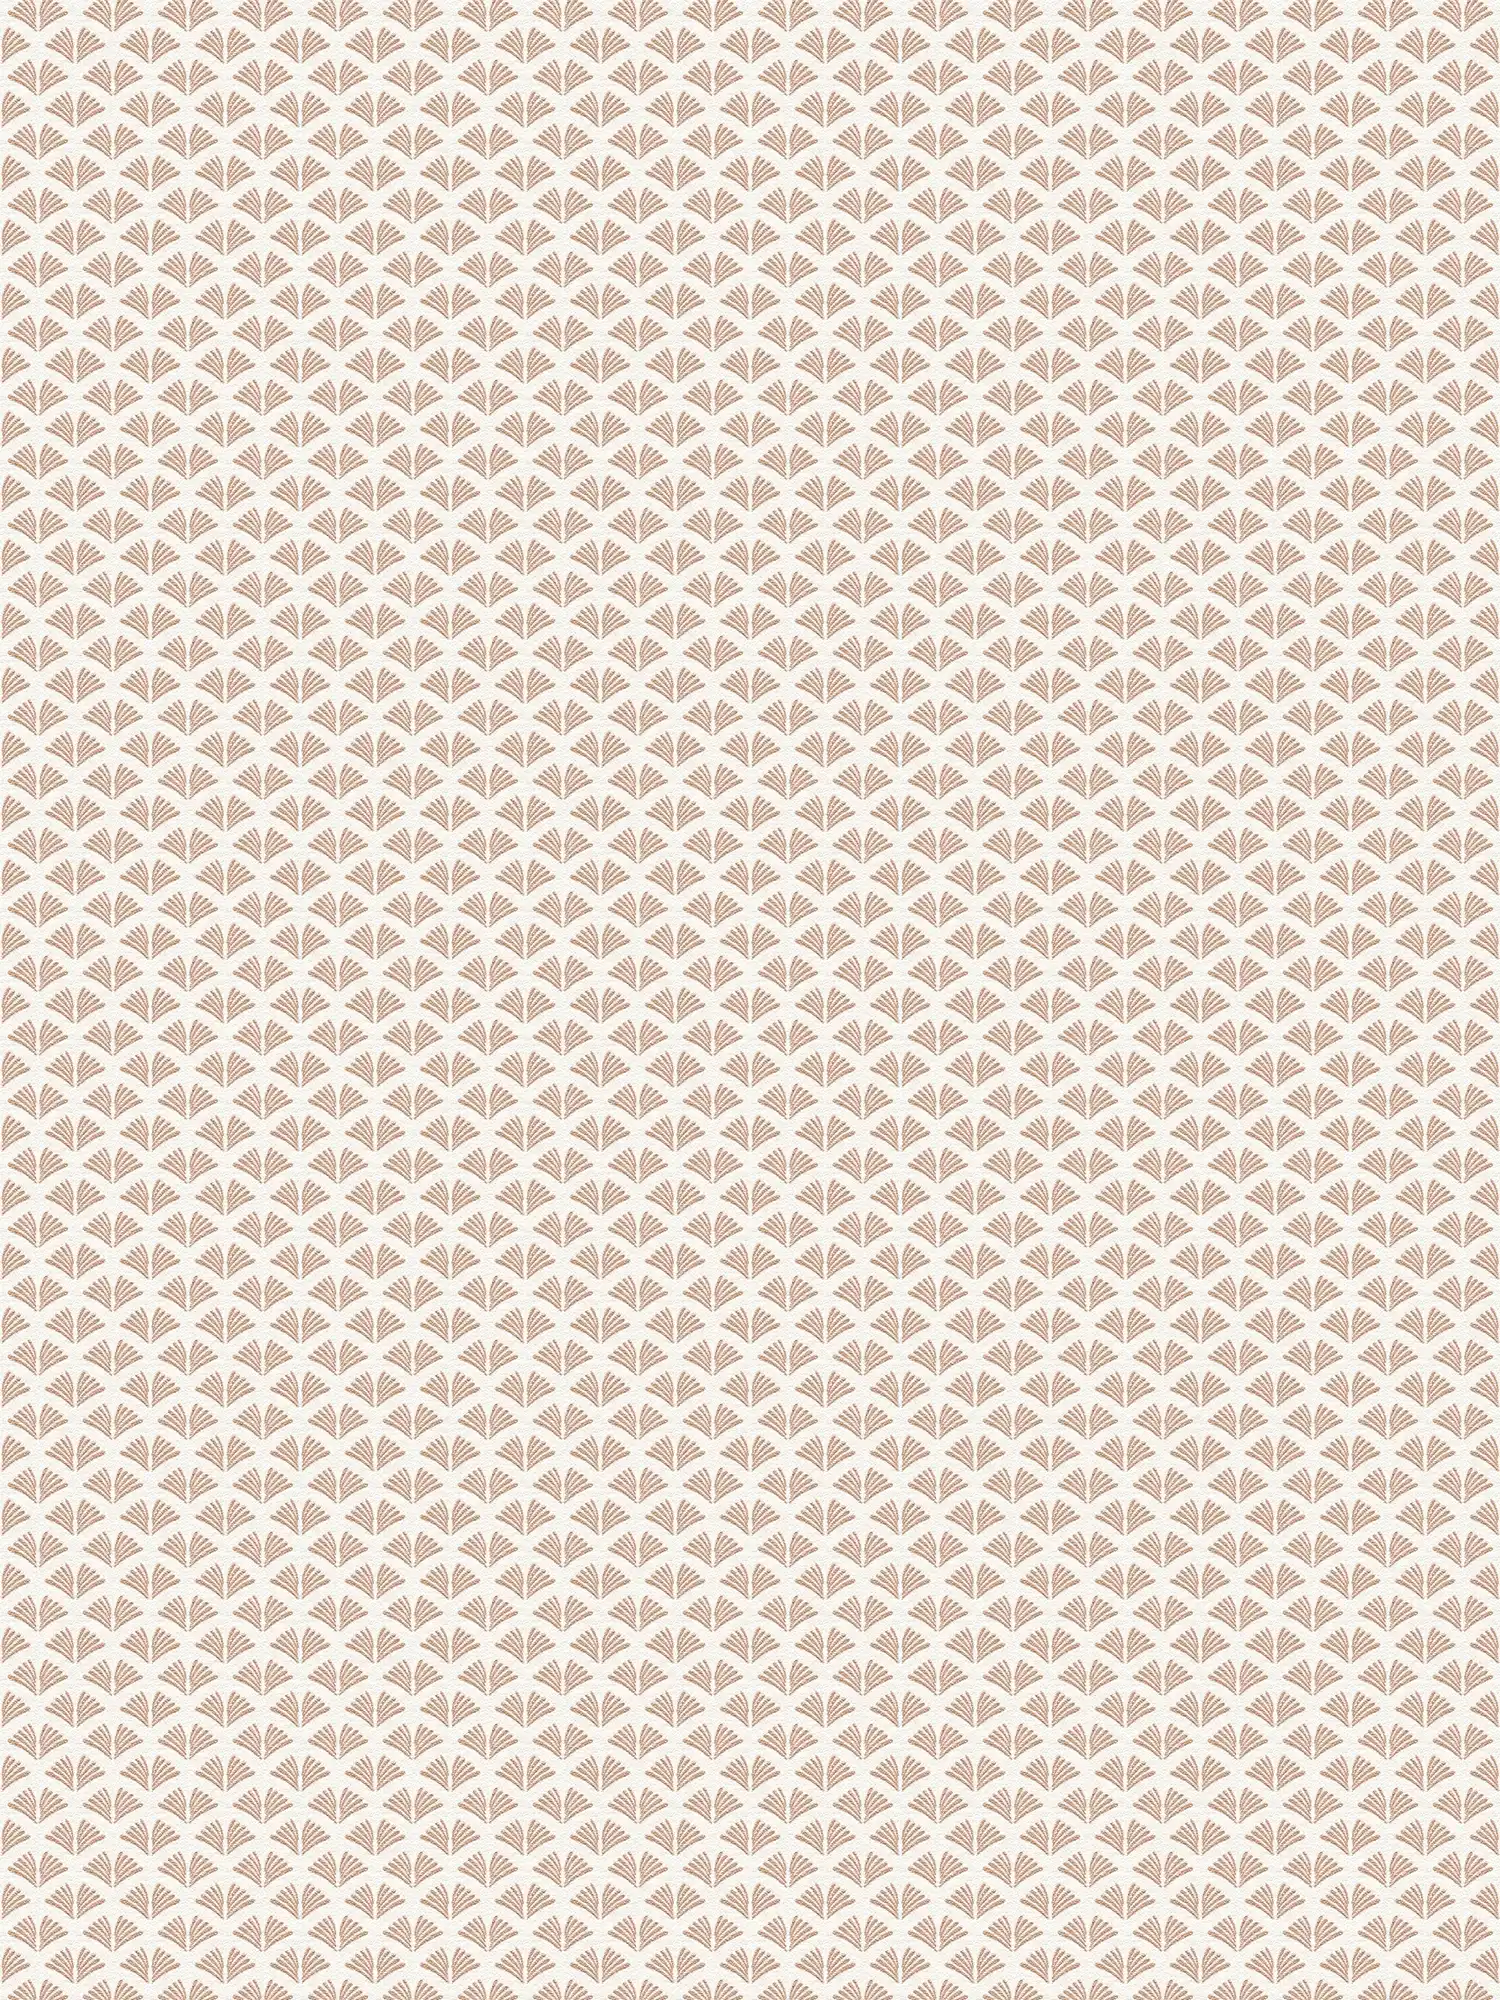 Non-woven wallpaper white with metallic gold pattern for design walls
